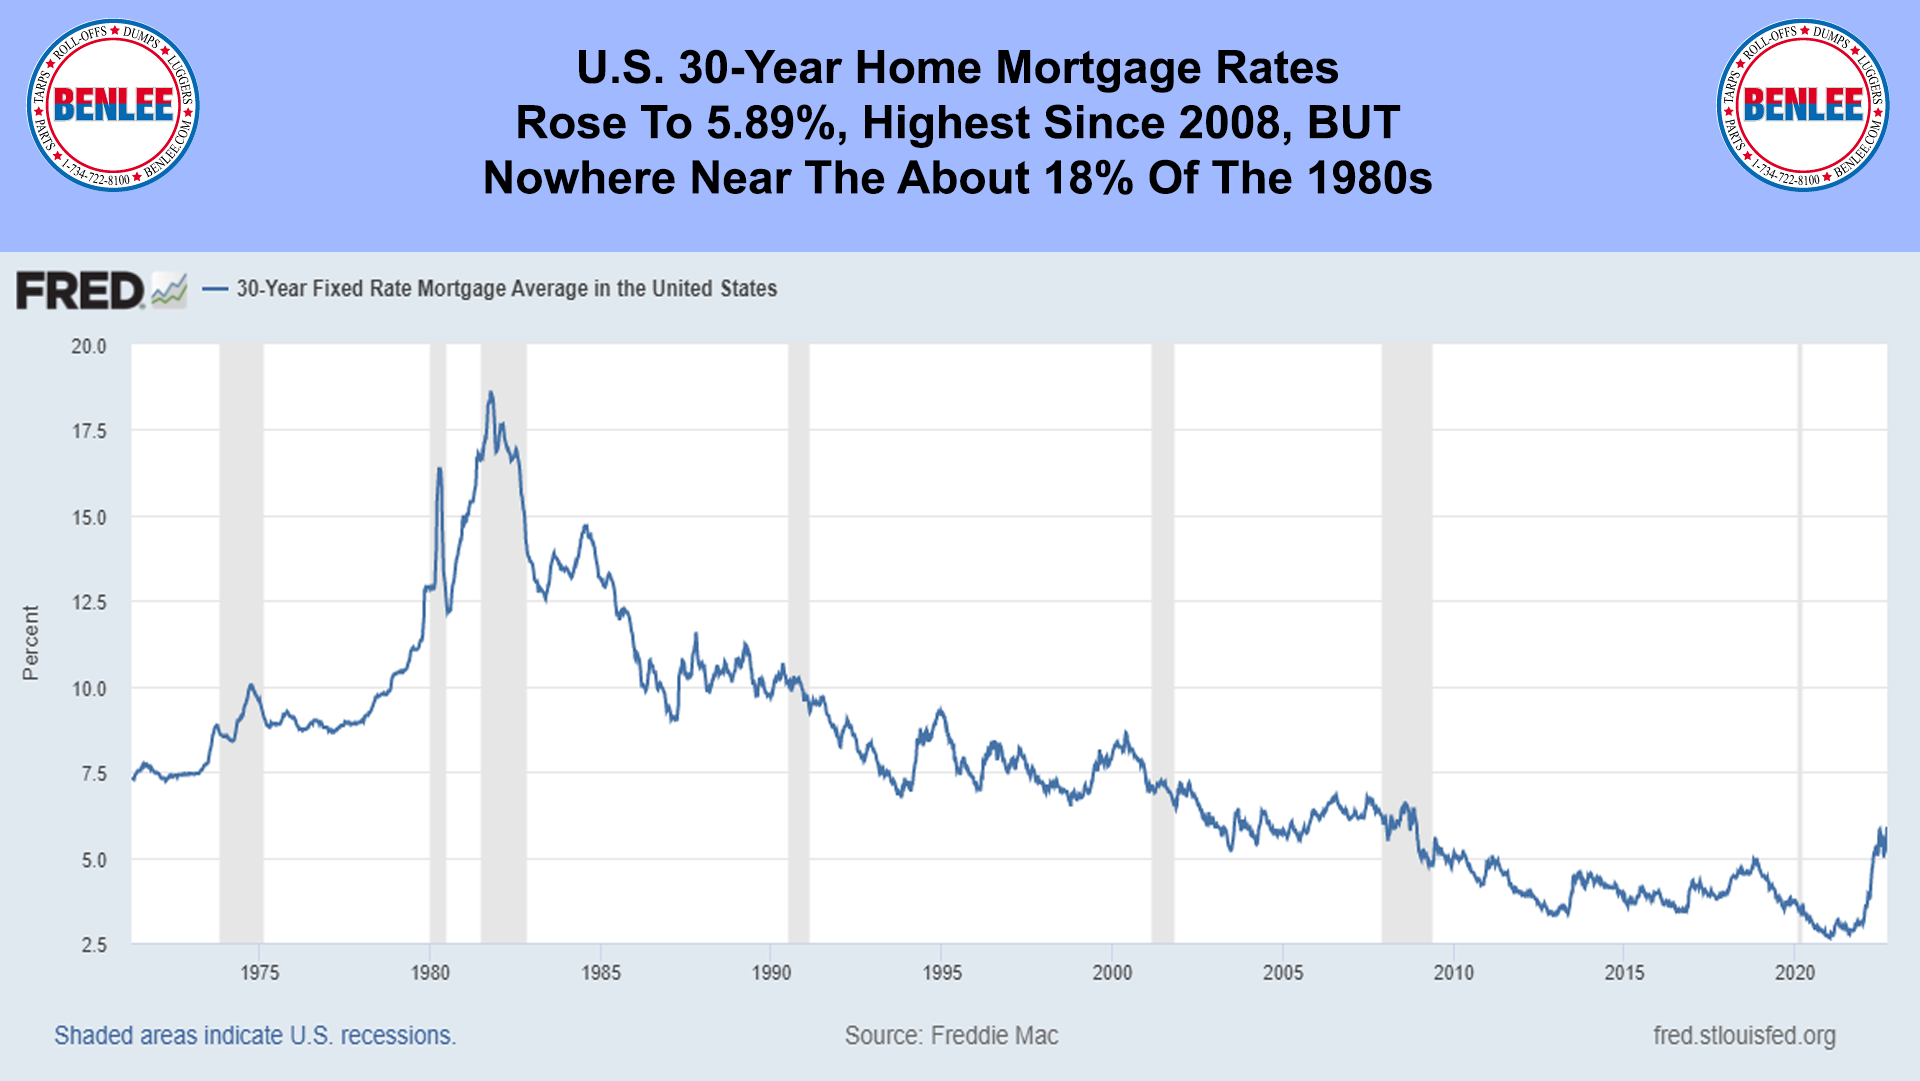 U.S. 30-Year Home Mortgage Rates